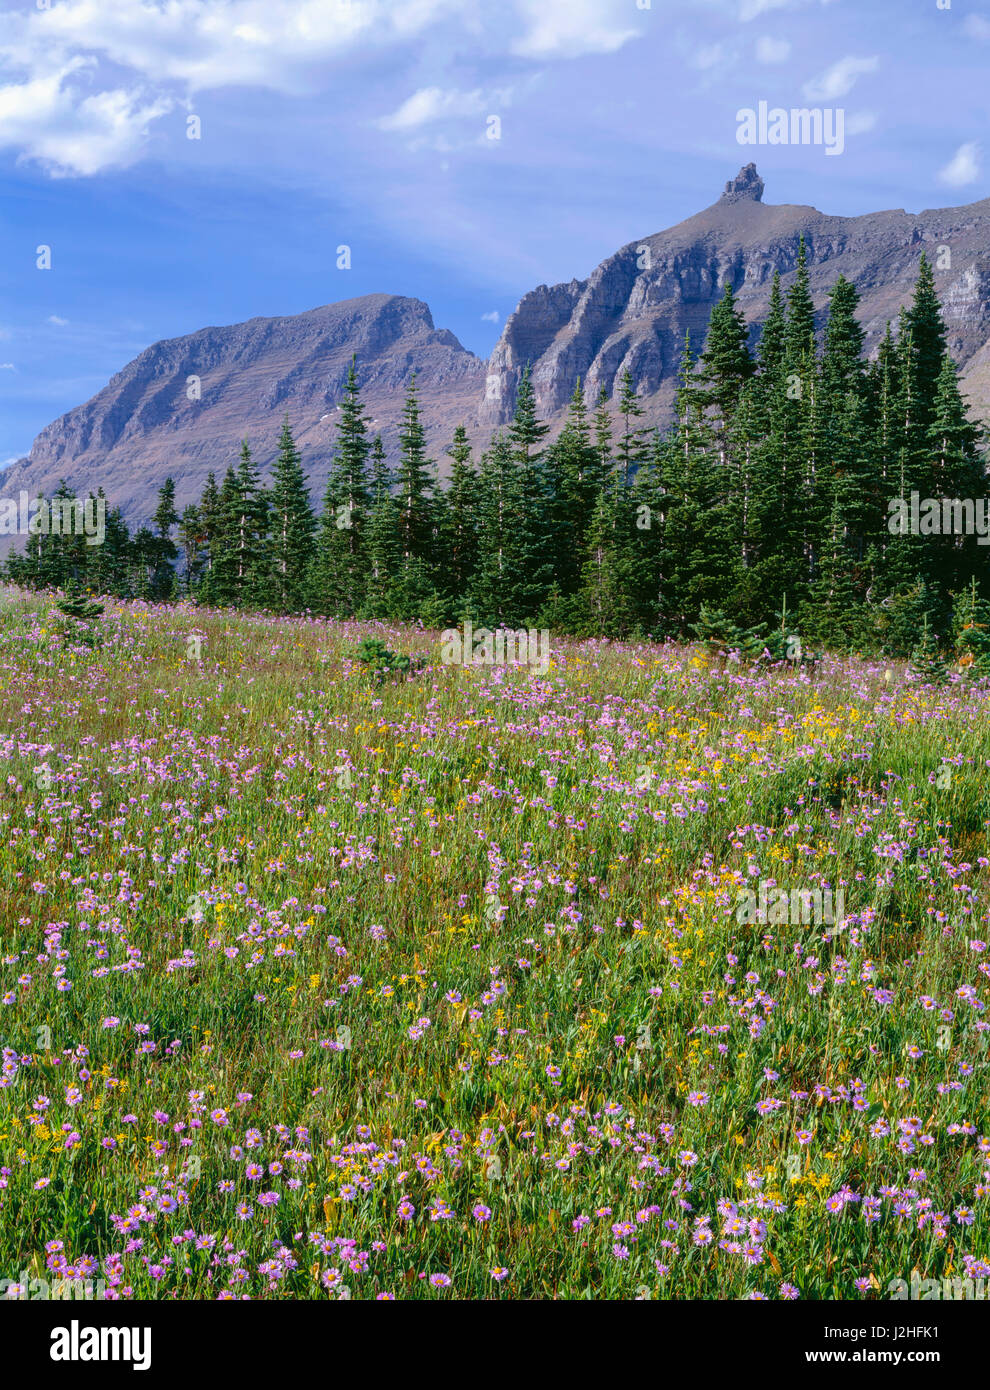 USA, Montana, Glacier National Park, Meadow of showy fleabane and arnica bordered by subalpine fir near Logan Pass, Mount Gould (center) and Bishops Cap (right) are in the distance. (Large format sizes available) Stock Photo